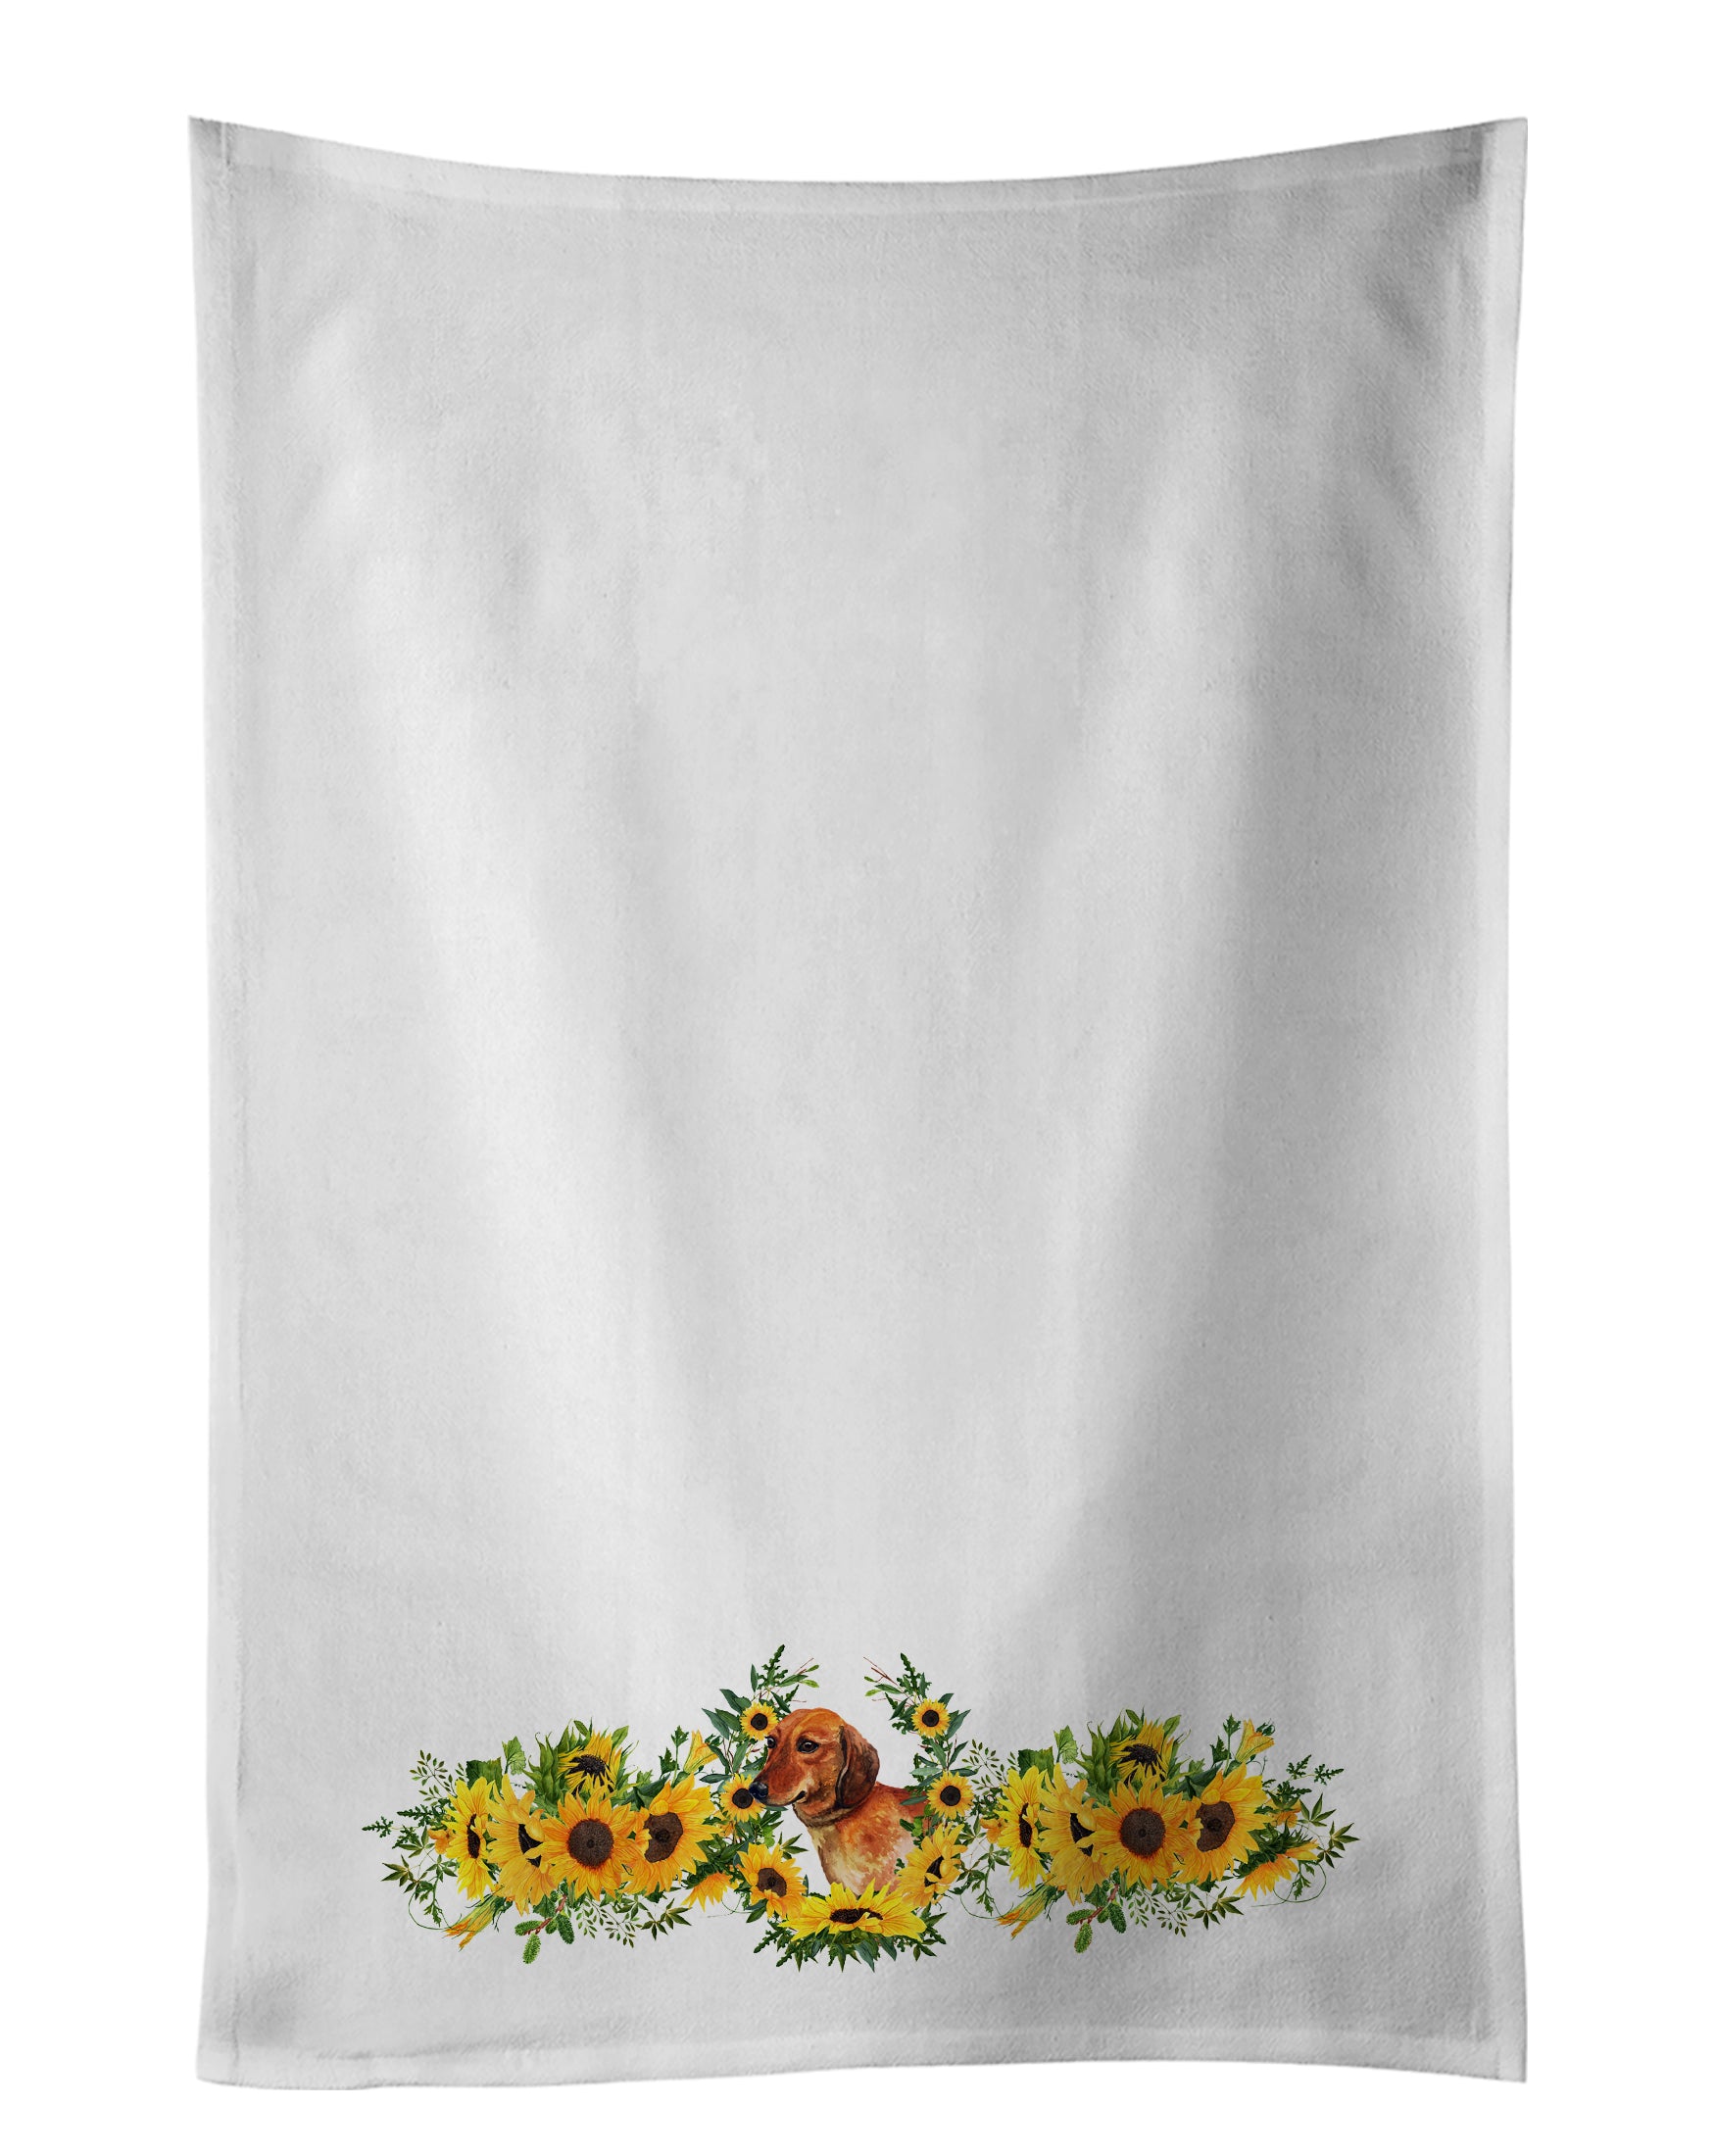 Buy this Dachshund in Sunflowers White Kitchen Towel Set of 2